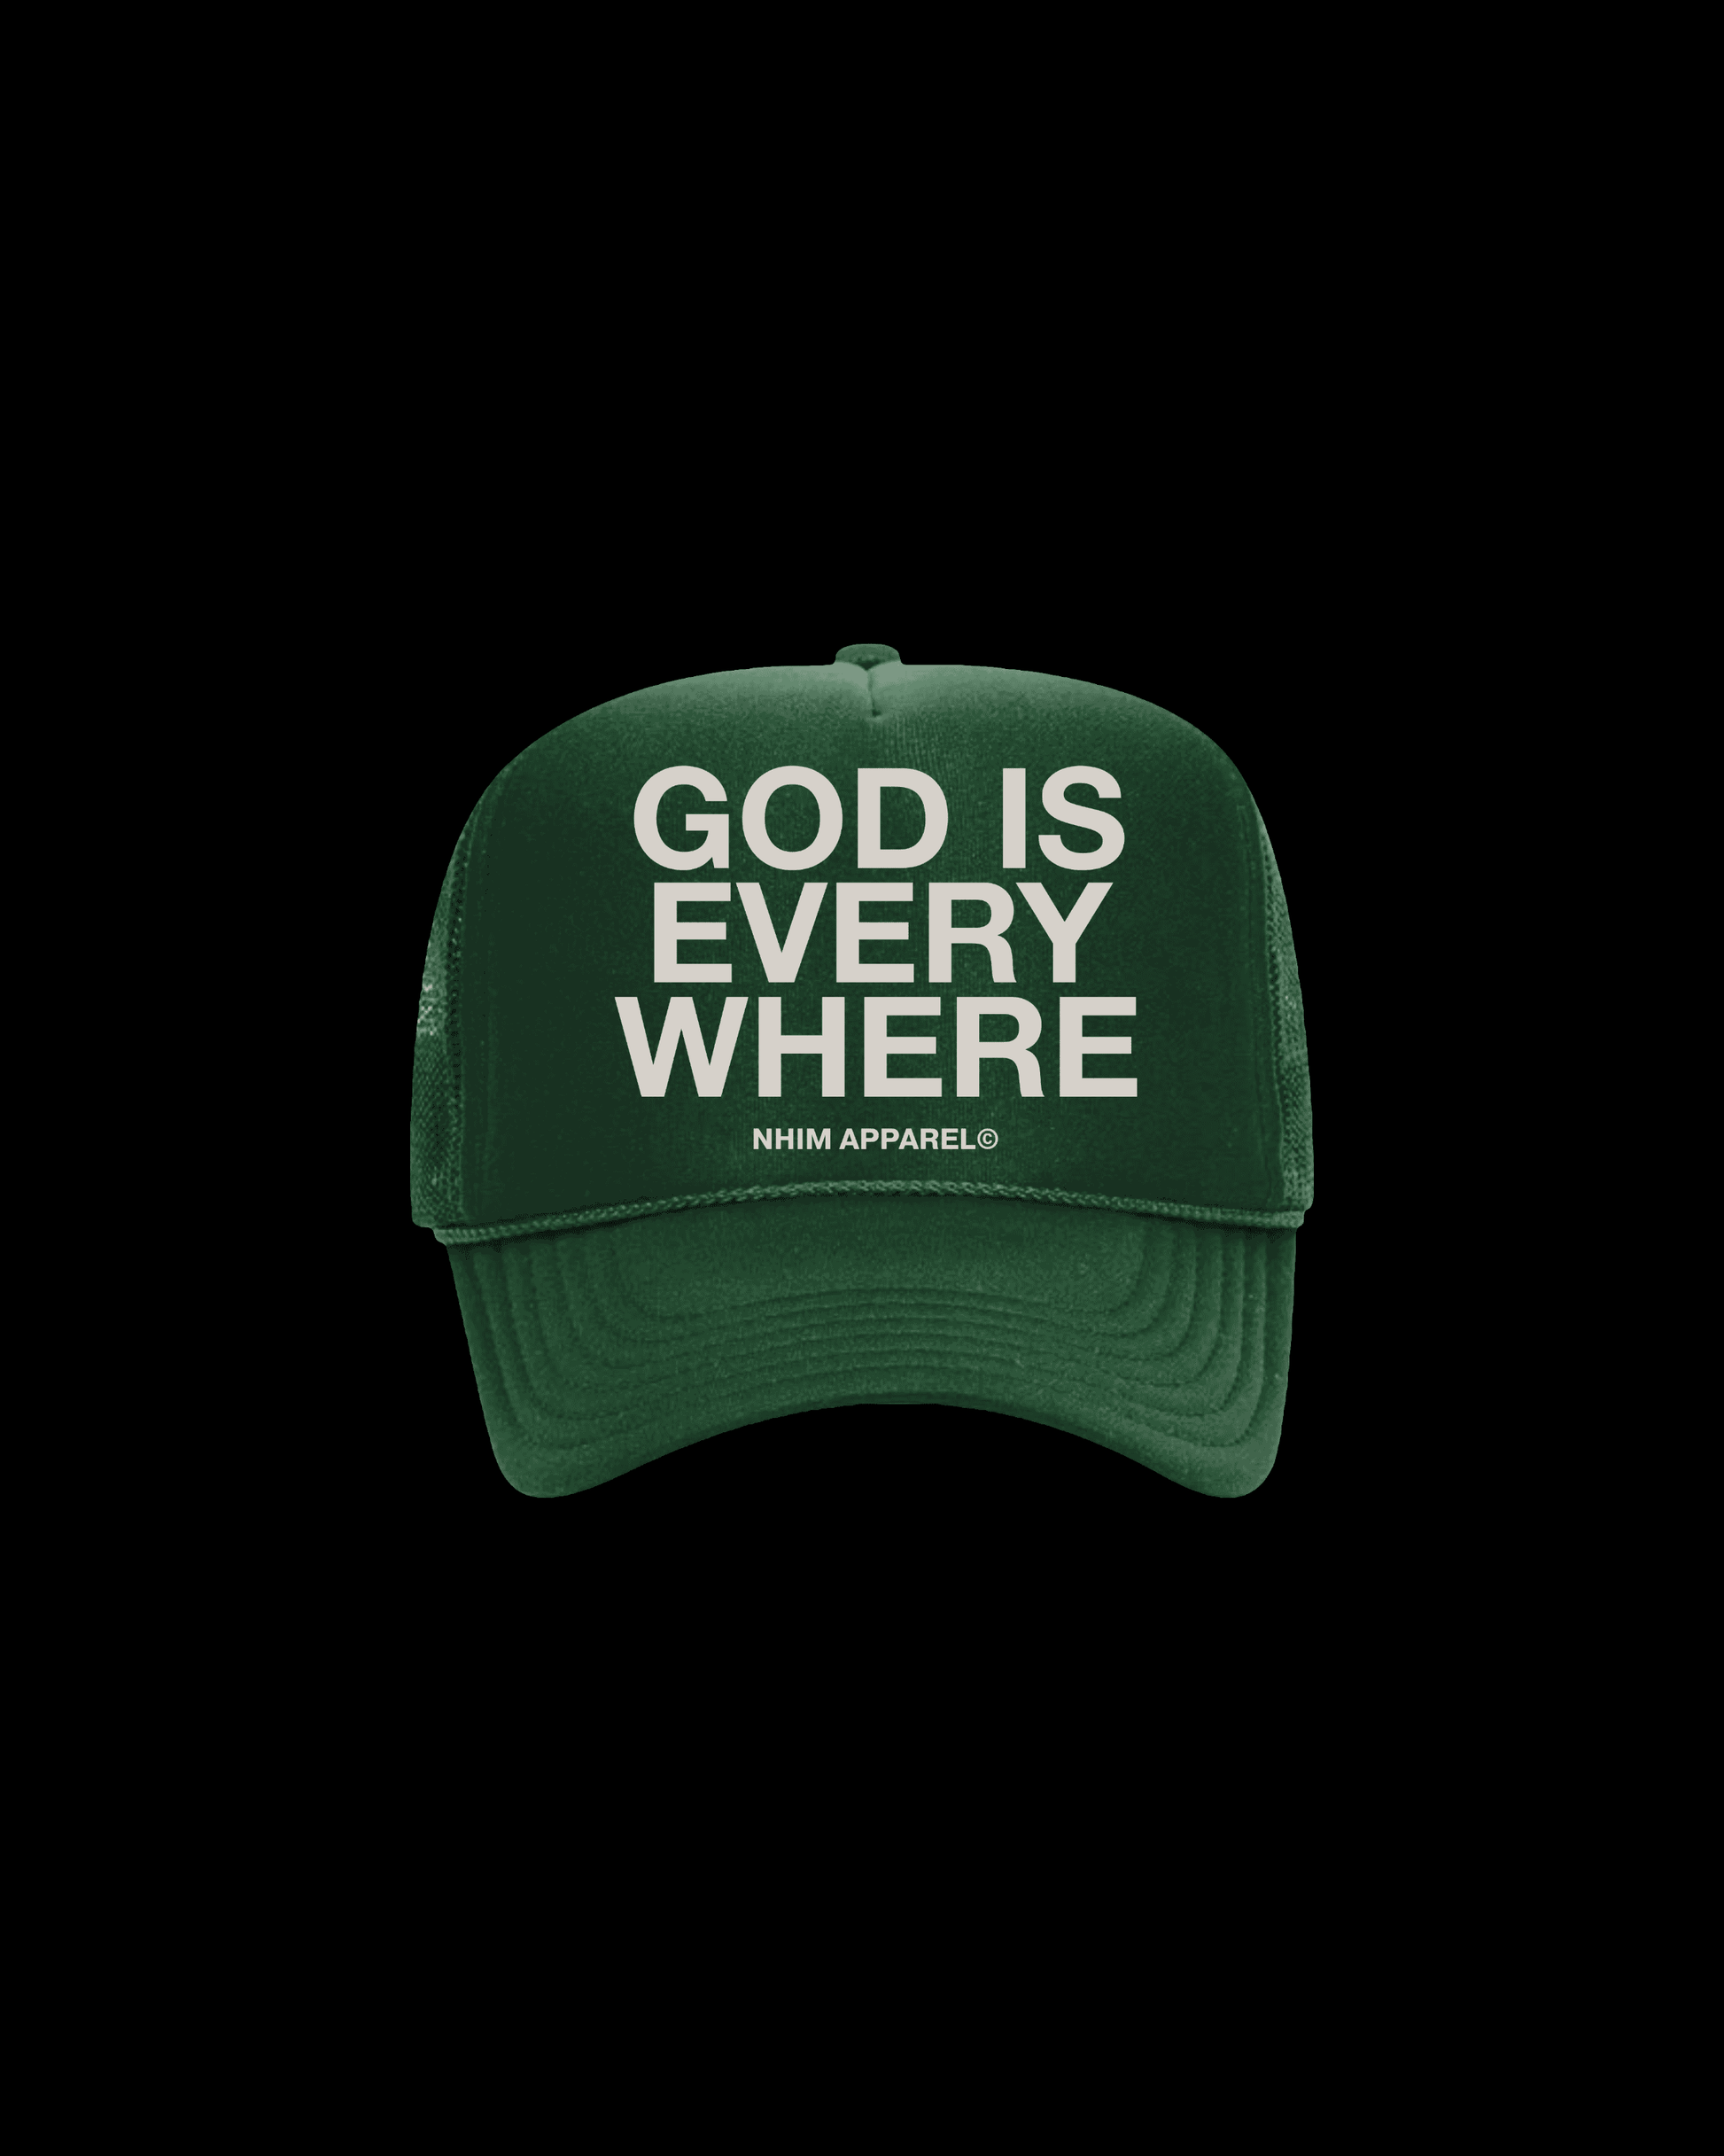 God Is Everywhere green colored christian trucker hat by NHIM Apparel christian clothing brand